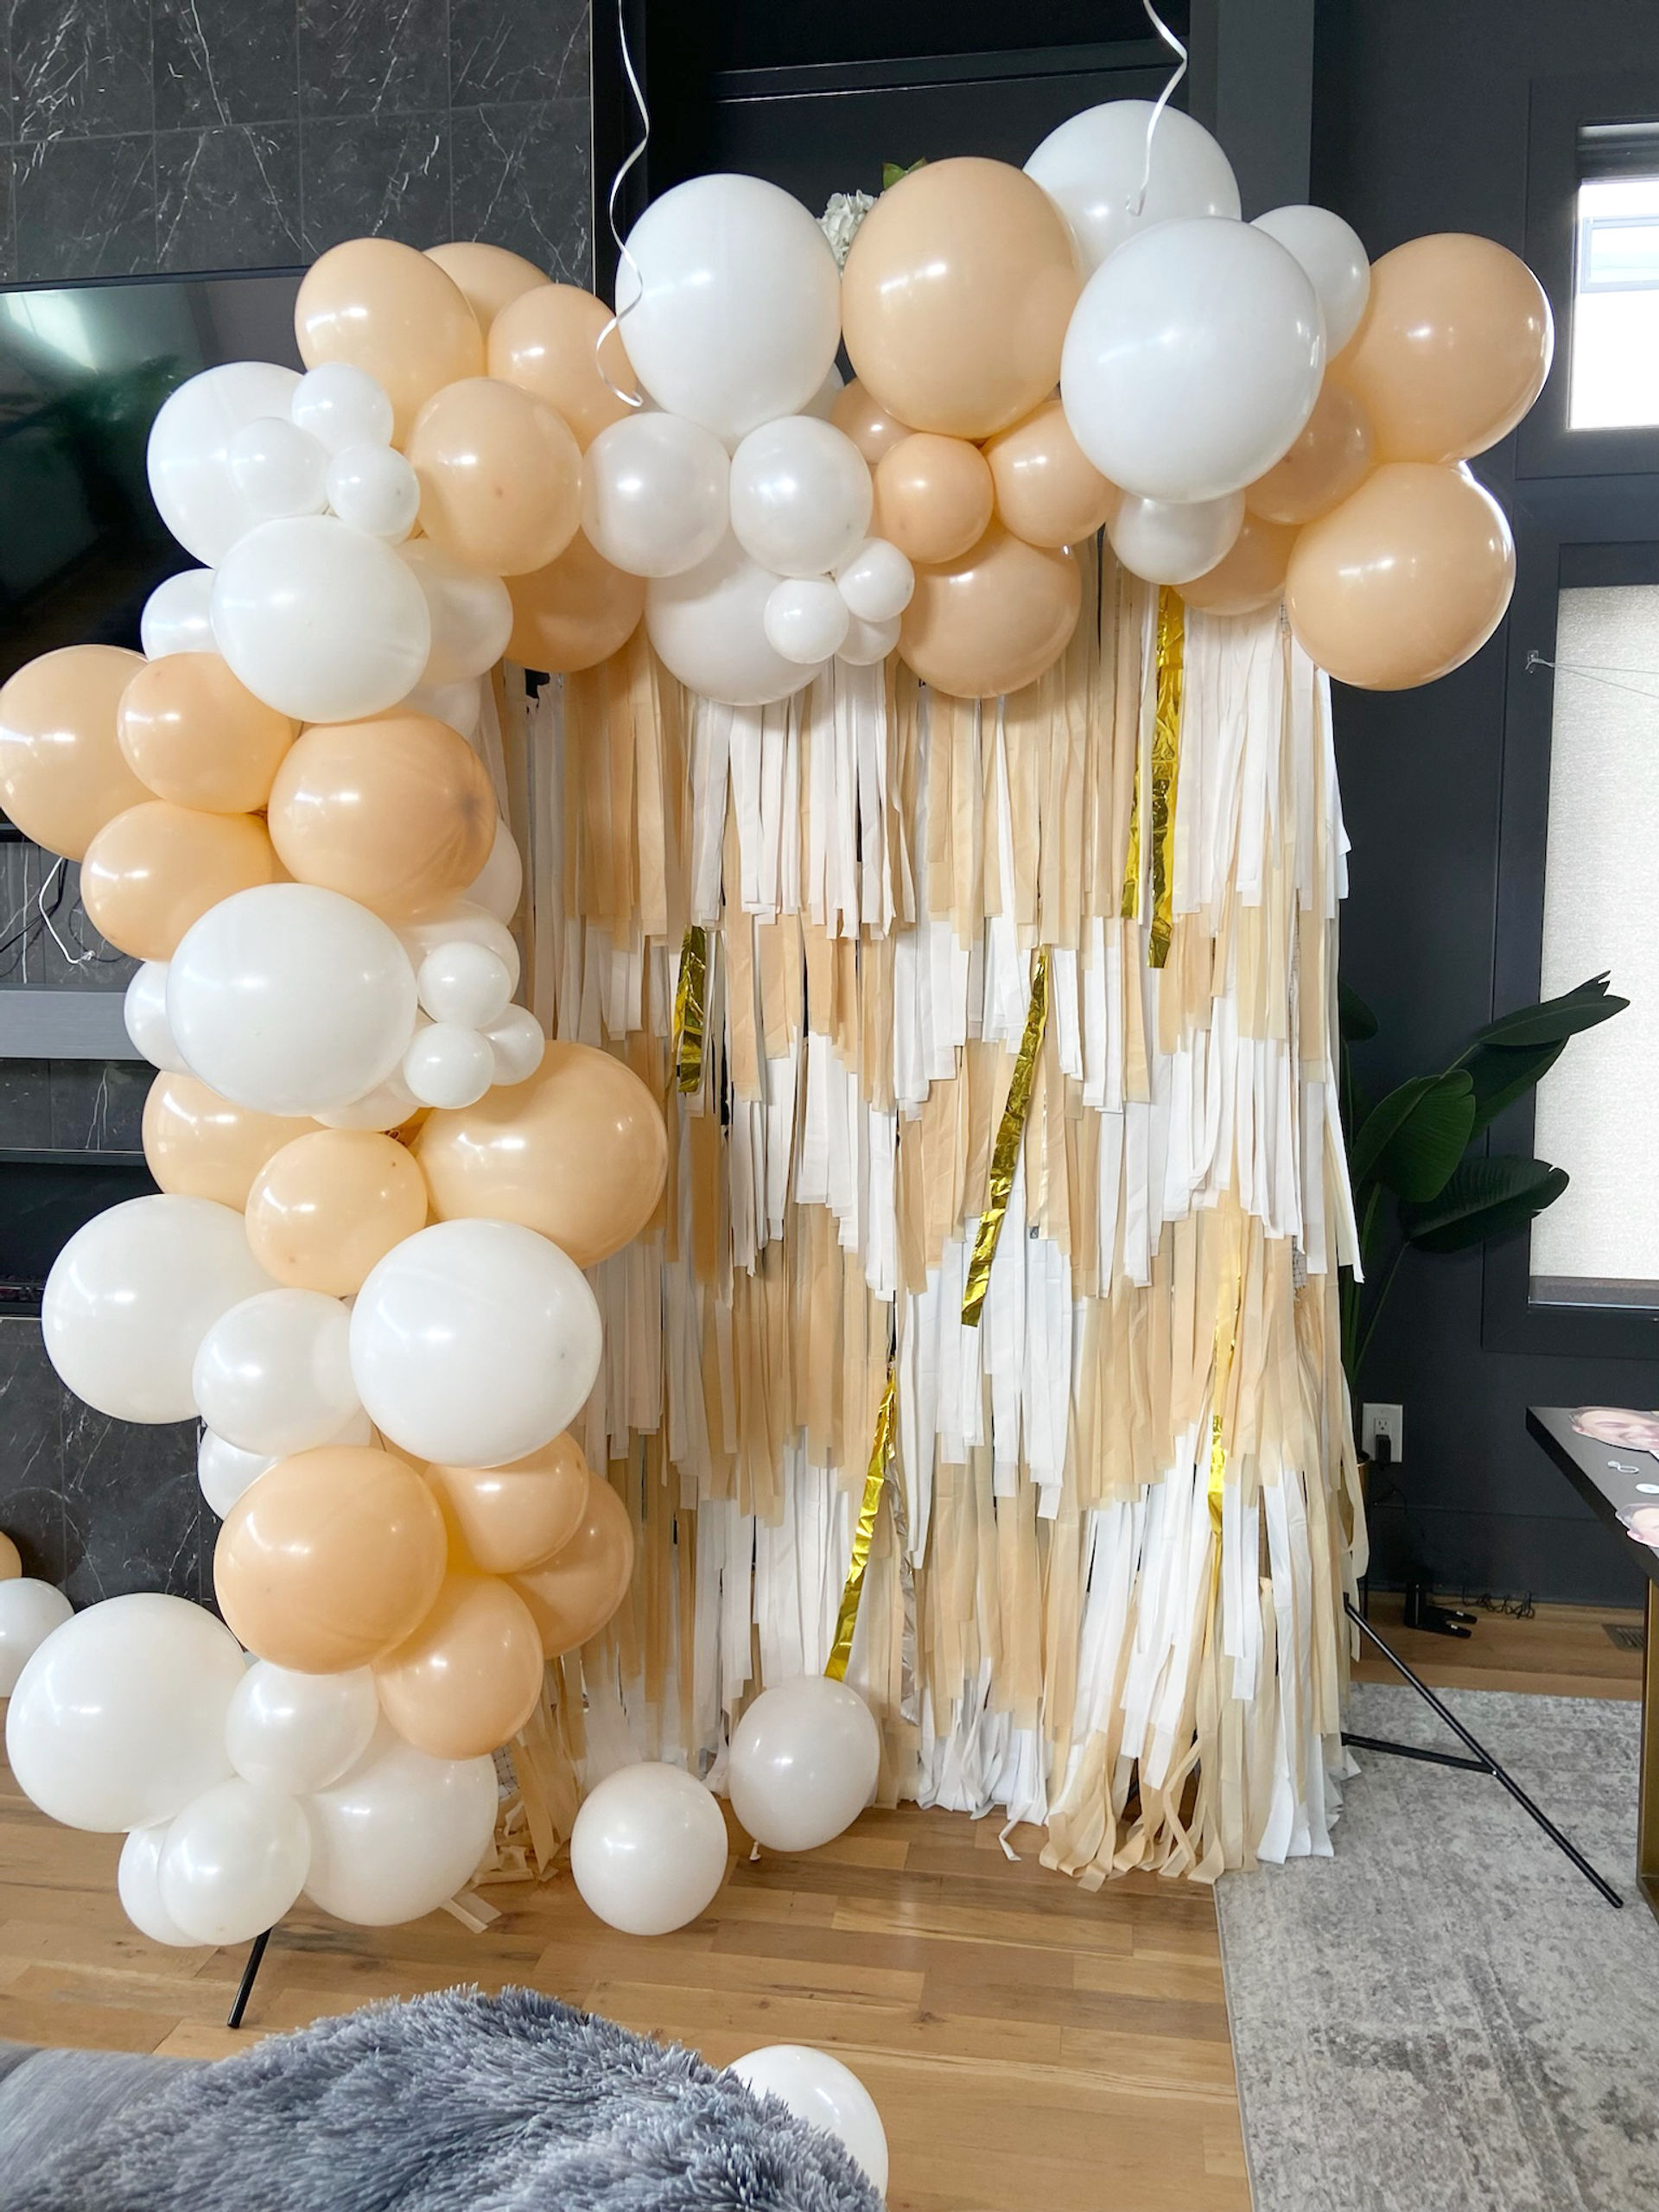 Party Decoration Packages with Delivery and Setup Included: Basic, Boujee,  & Beyond